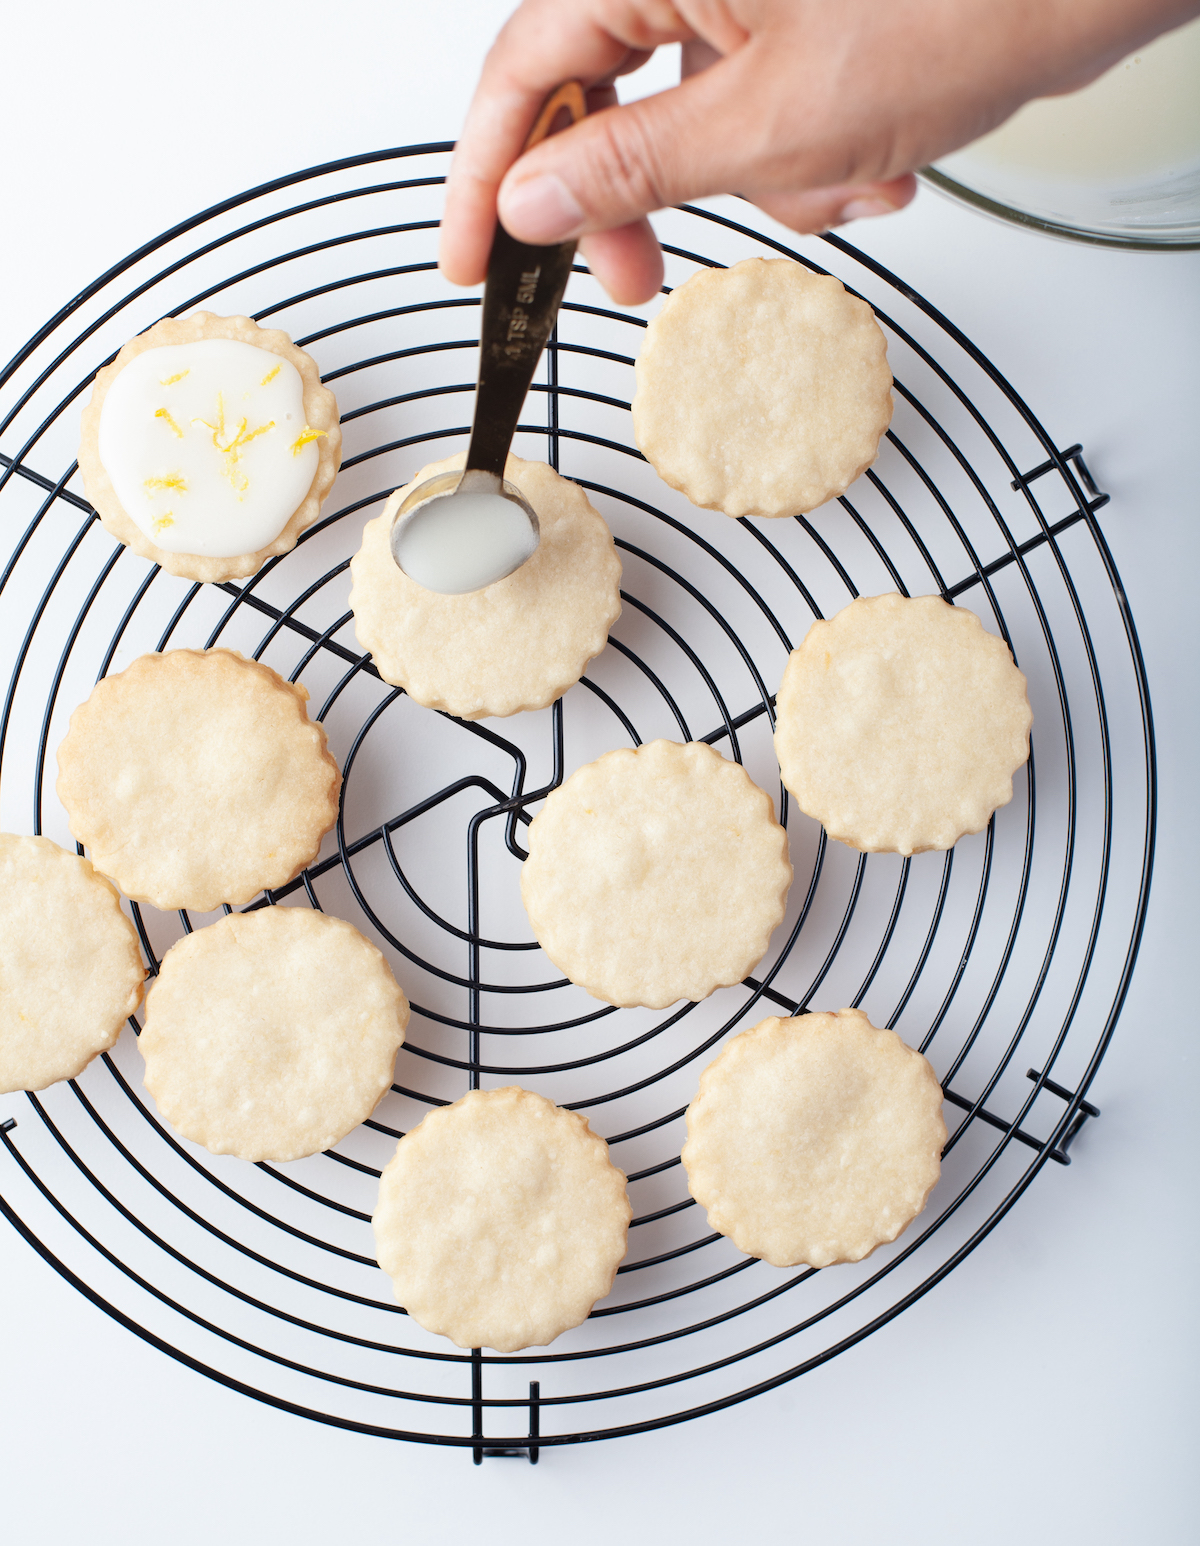 Drizzling the lemon glaze onto the cookies